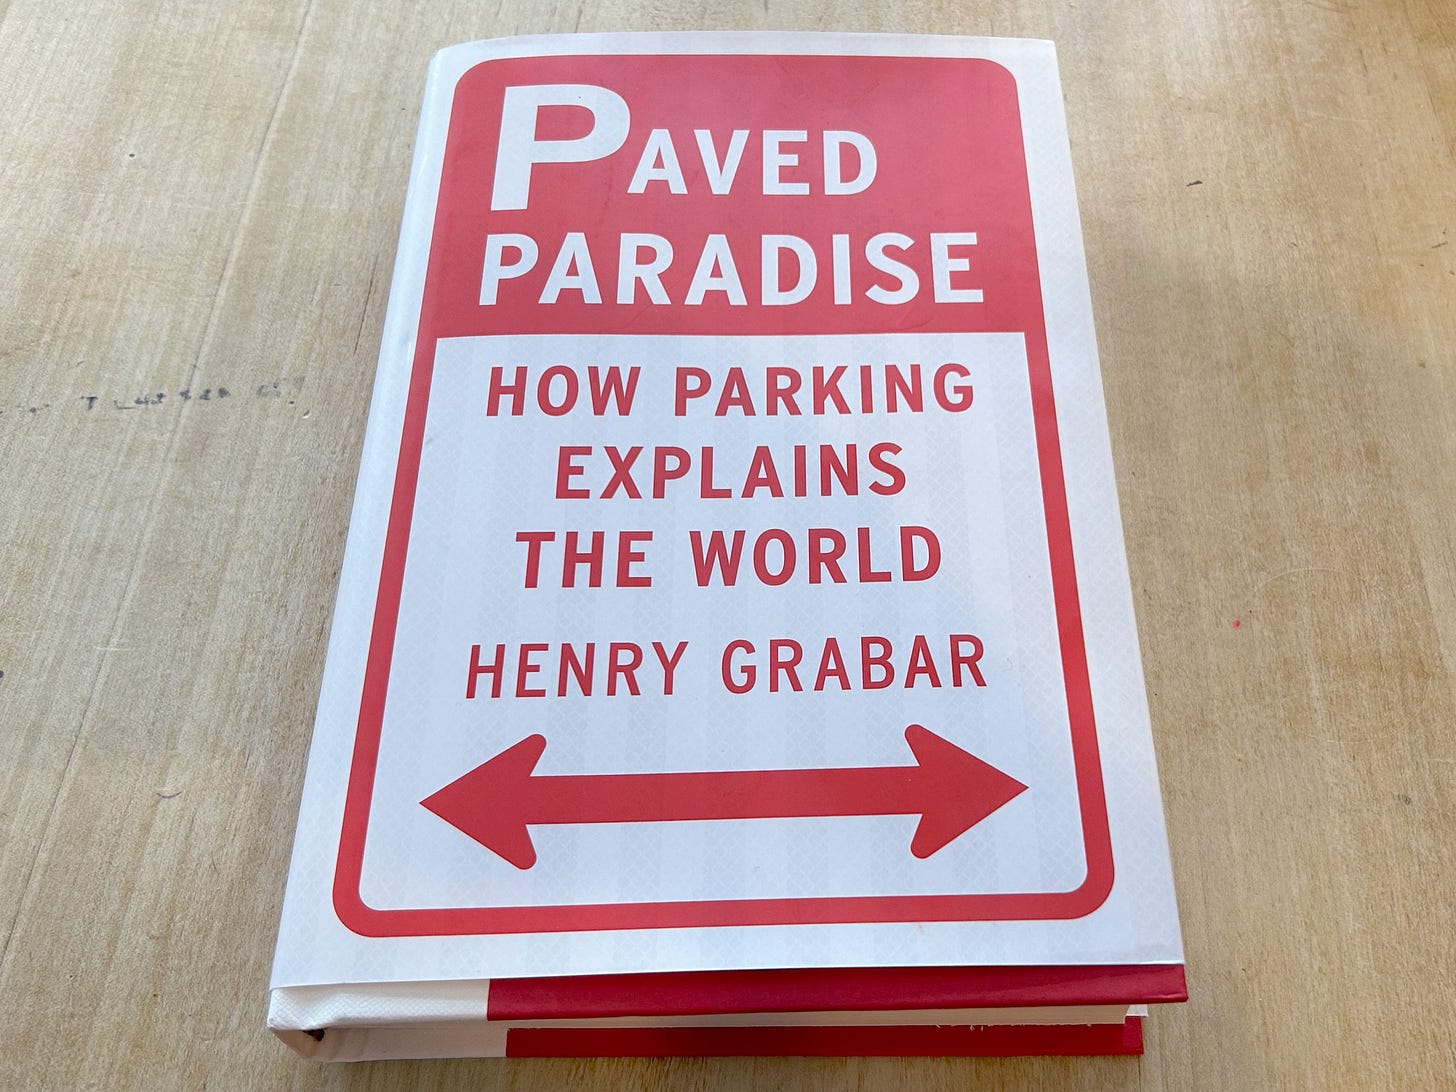 Photo of the book "Paved Paradise" by Henry Grabar